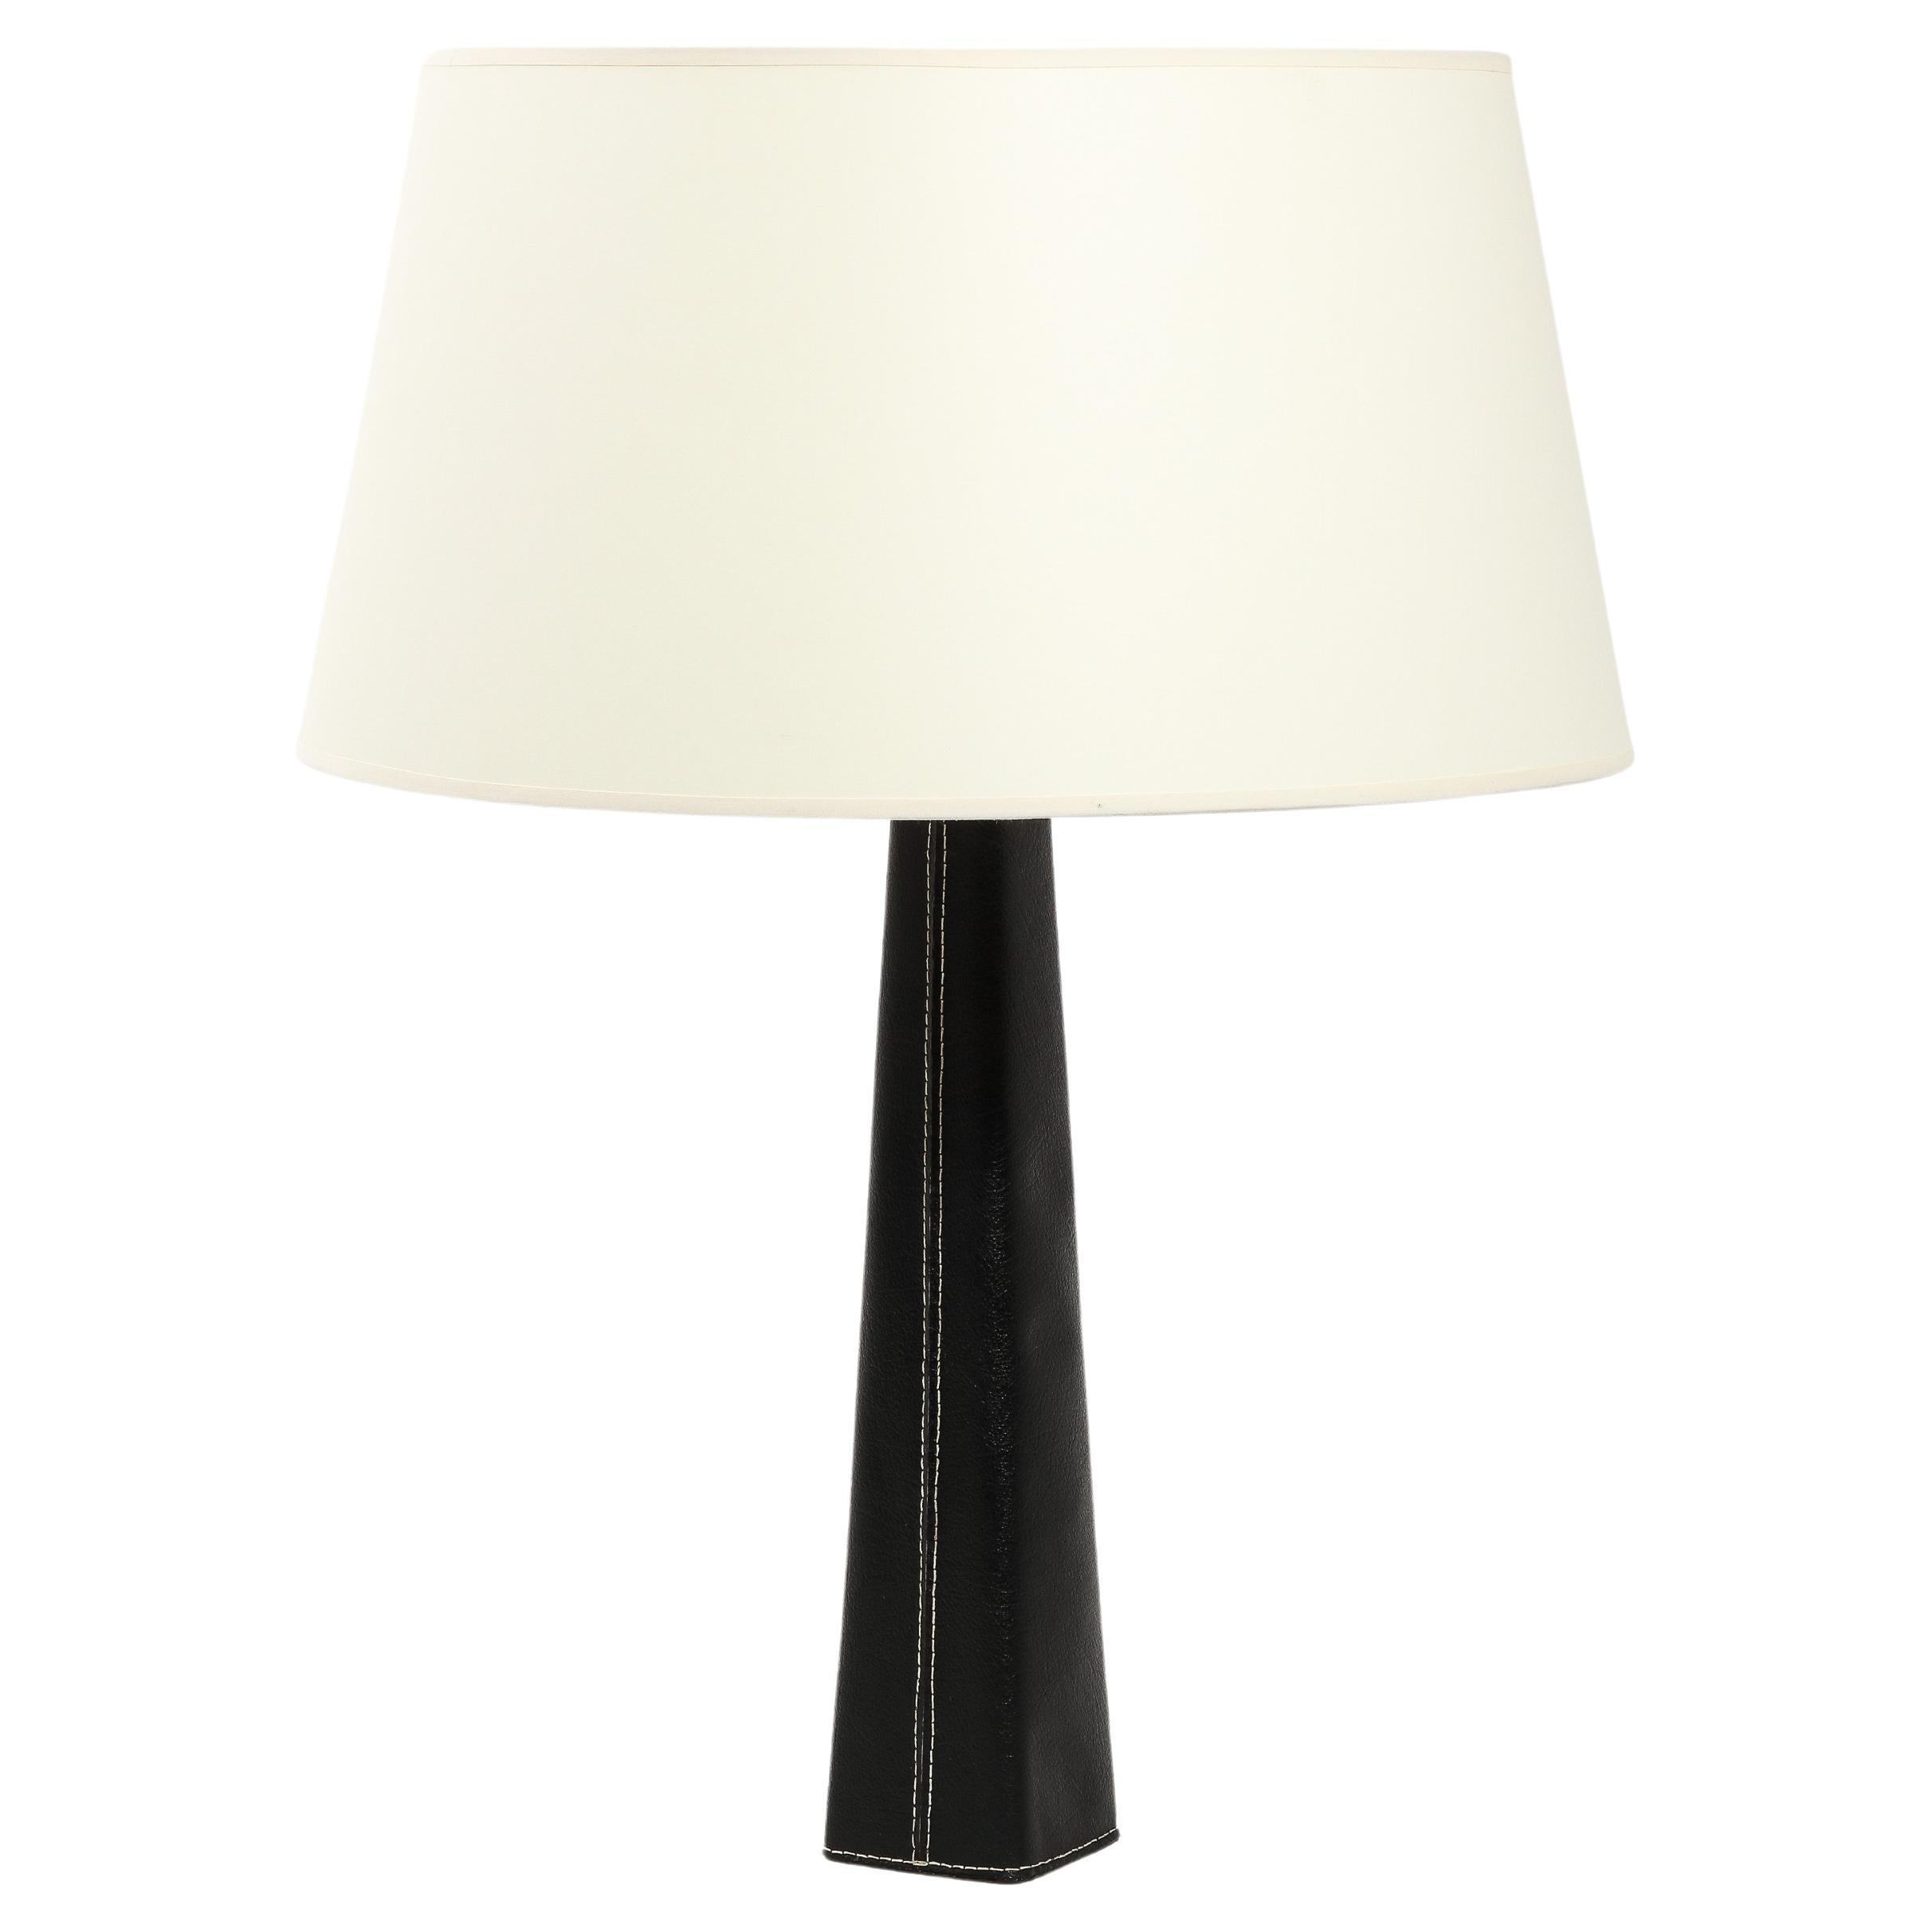 Learthe Covered Table Lamp by Metalarte, Spain 1970's For Sale